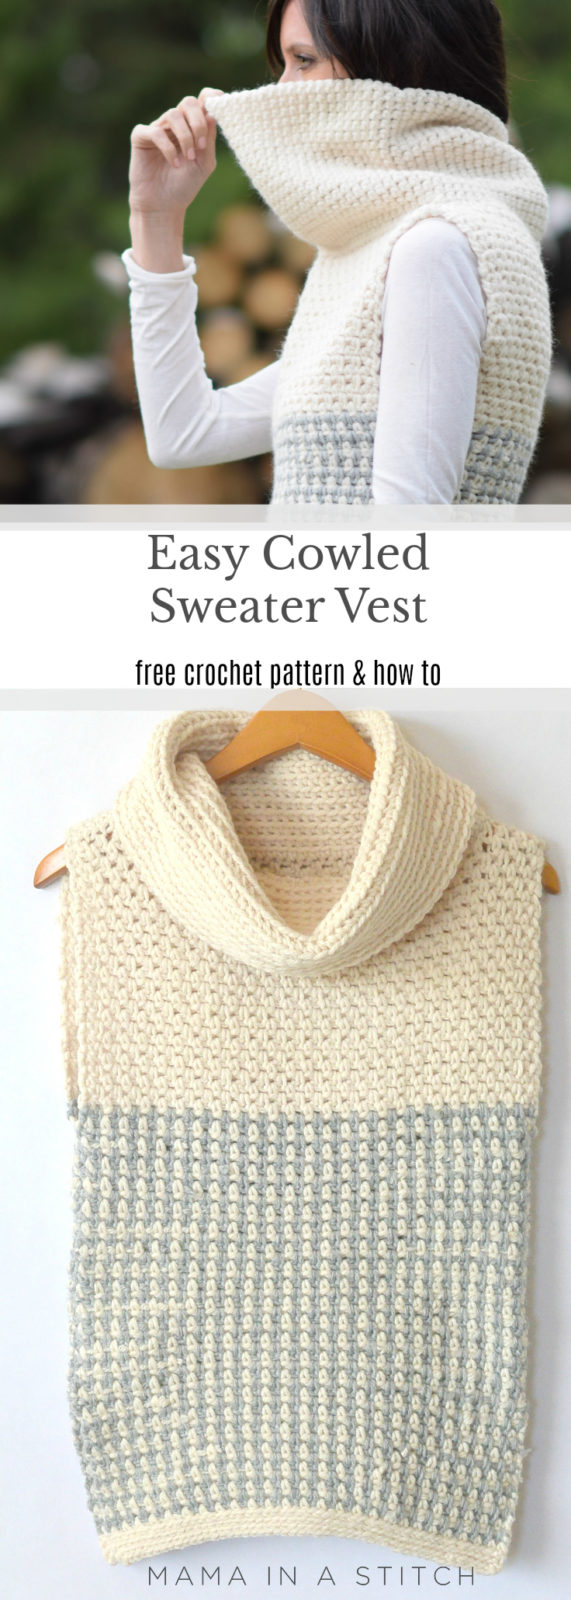 Easy Crochet Cowled Sweater Vest – Mama In A Stitch